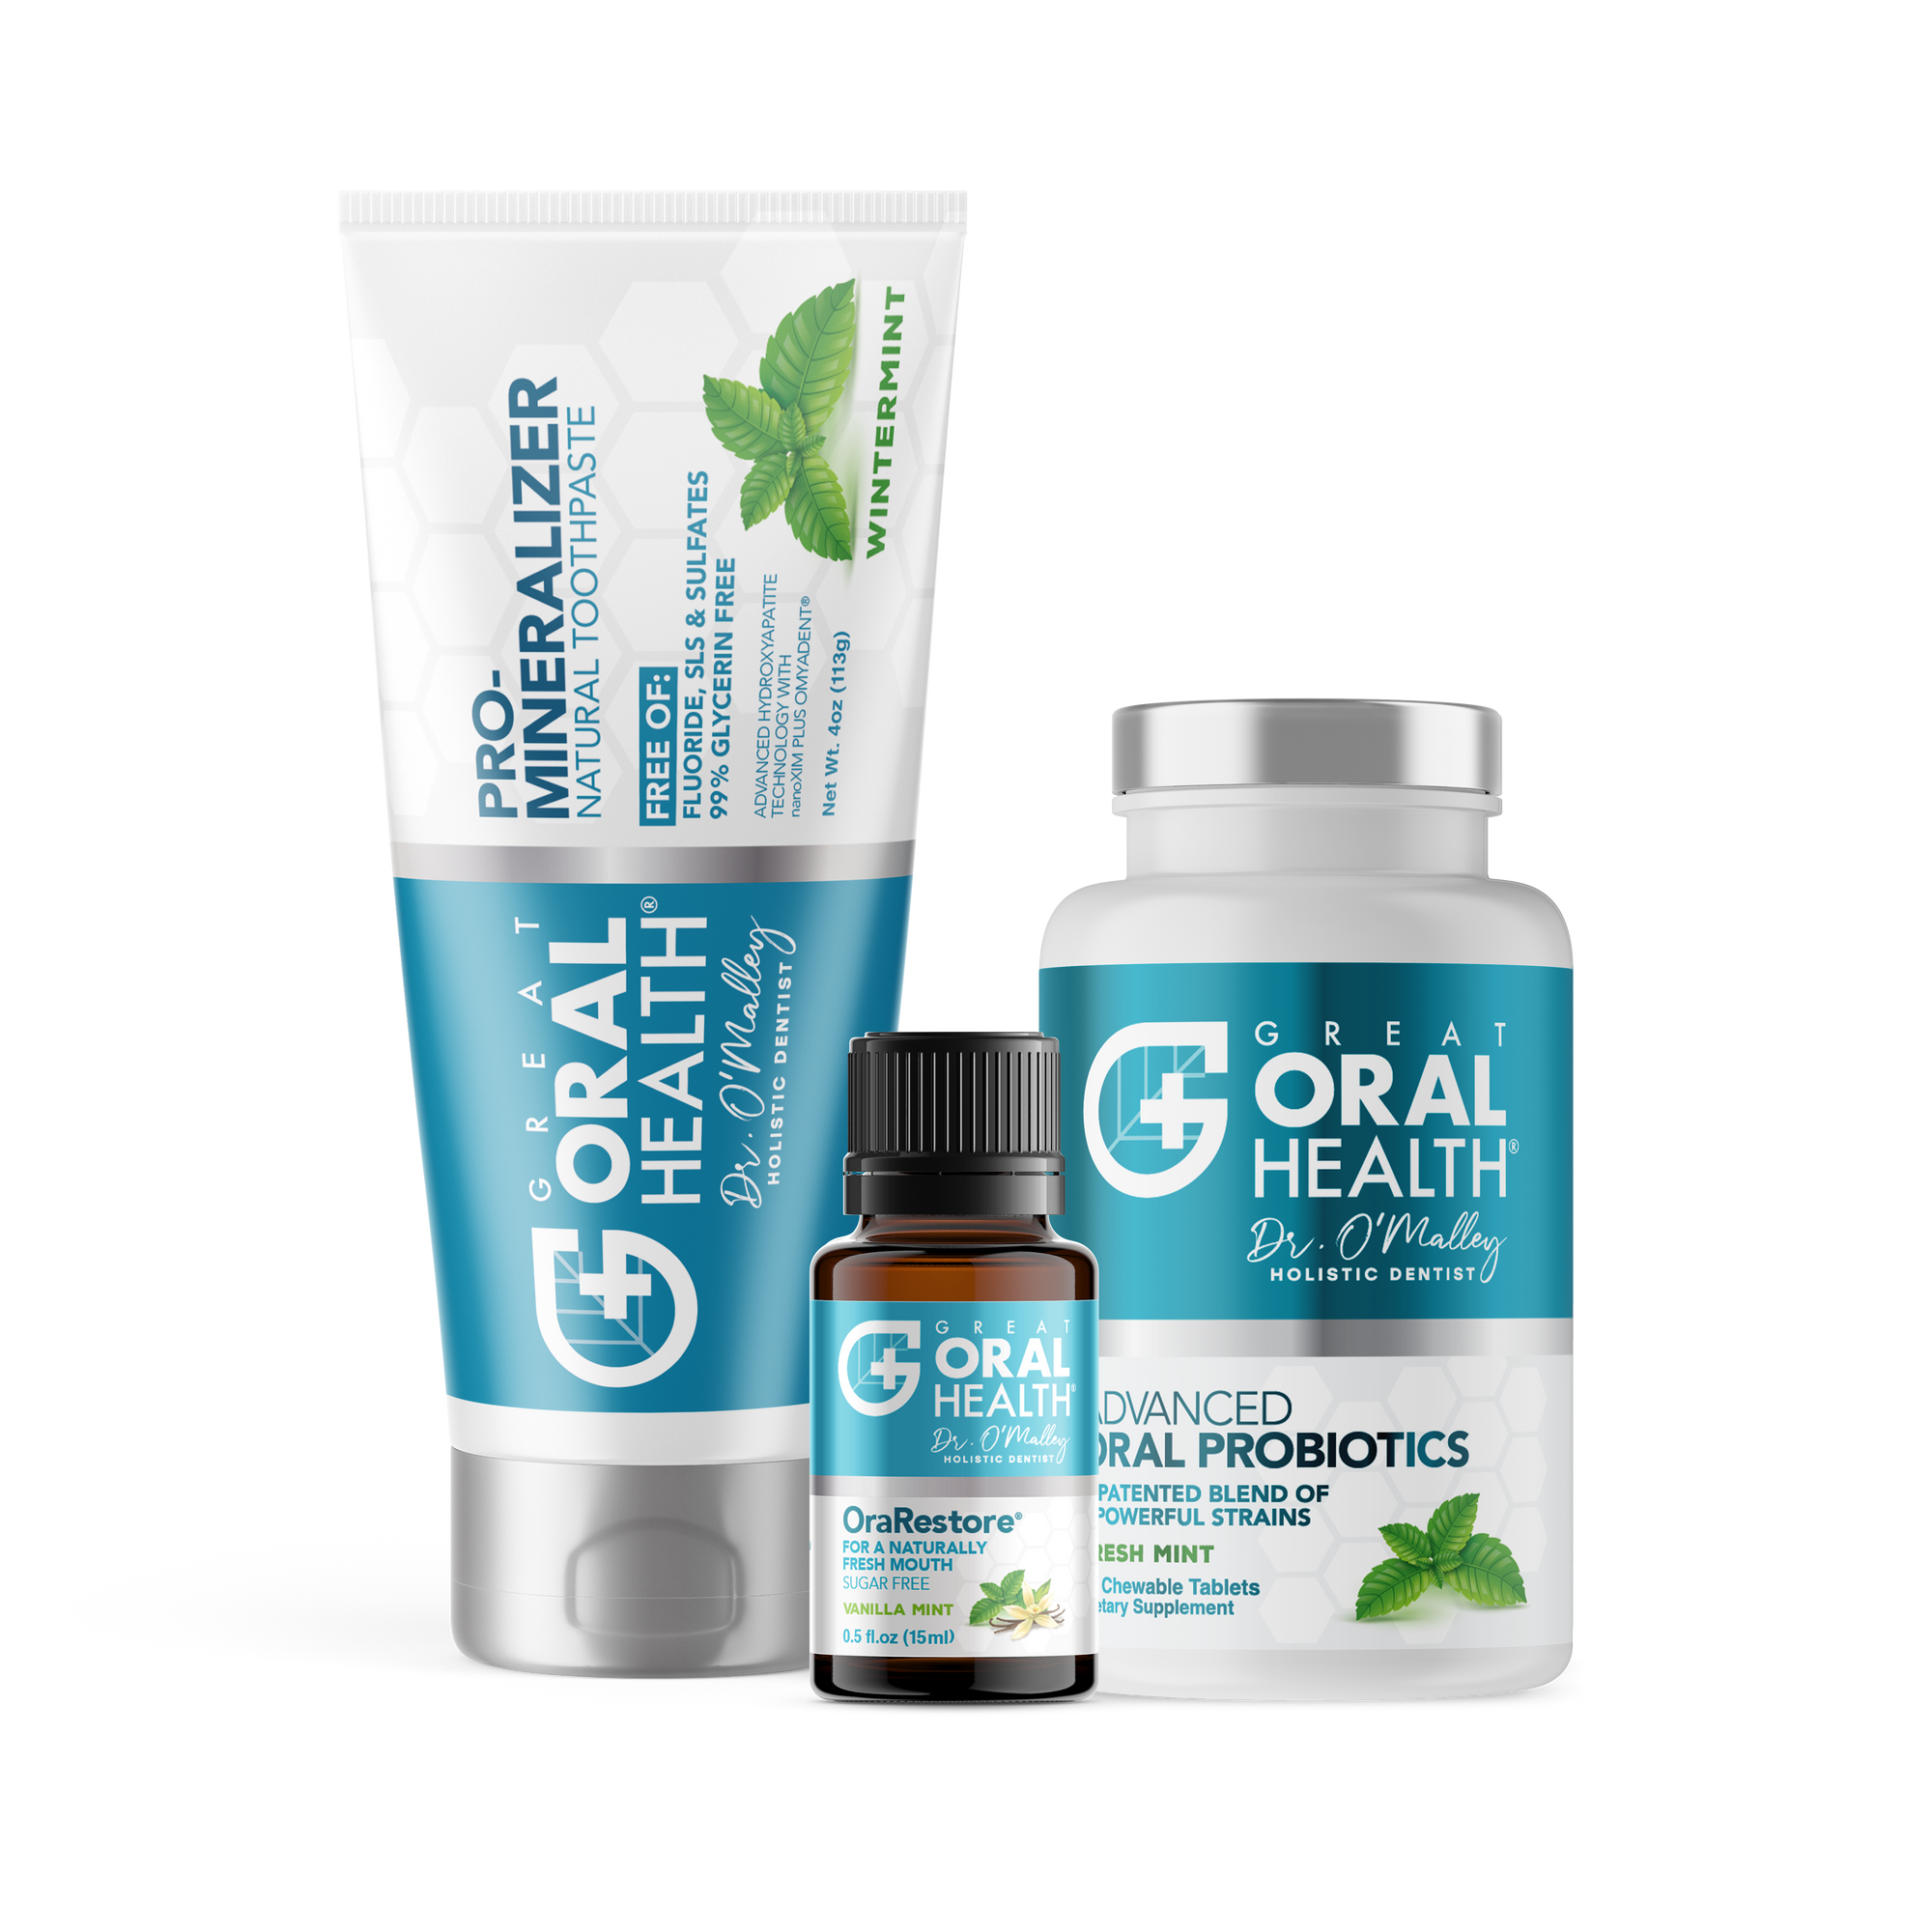 The Top Trio for Oral Hygiene & Healthy Gums: Oral Probiotics, Remineralizing Toothpaste and Essential Oil Blend